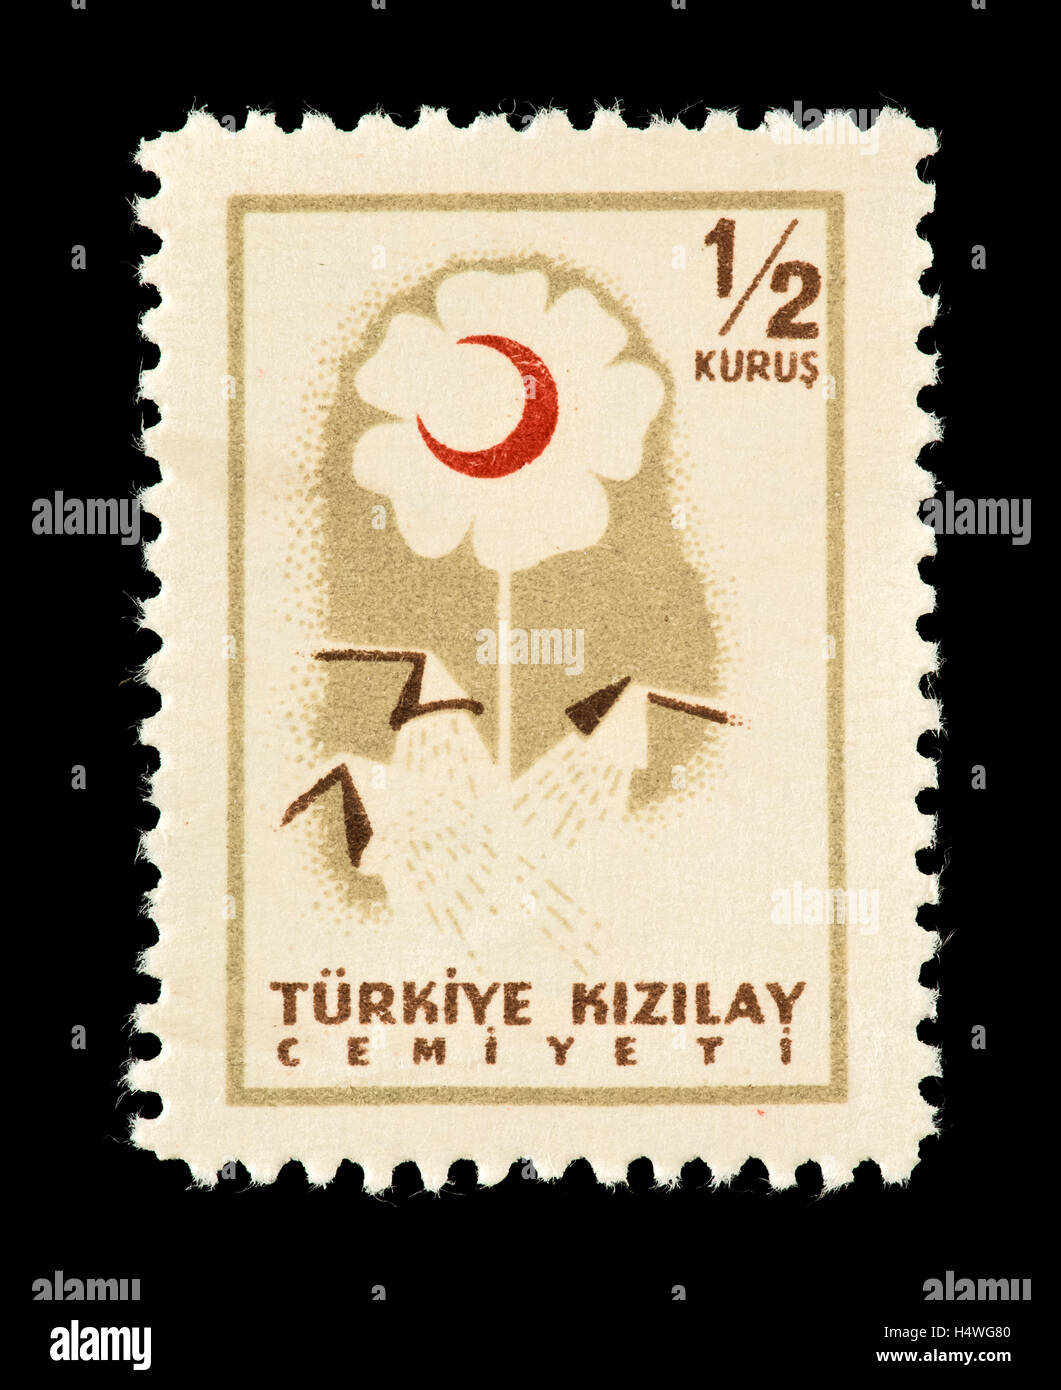 Postal tax stamp from Turkey depicting a flower and Red Crescent Stock Photo